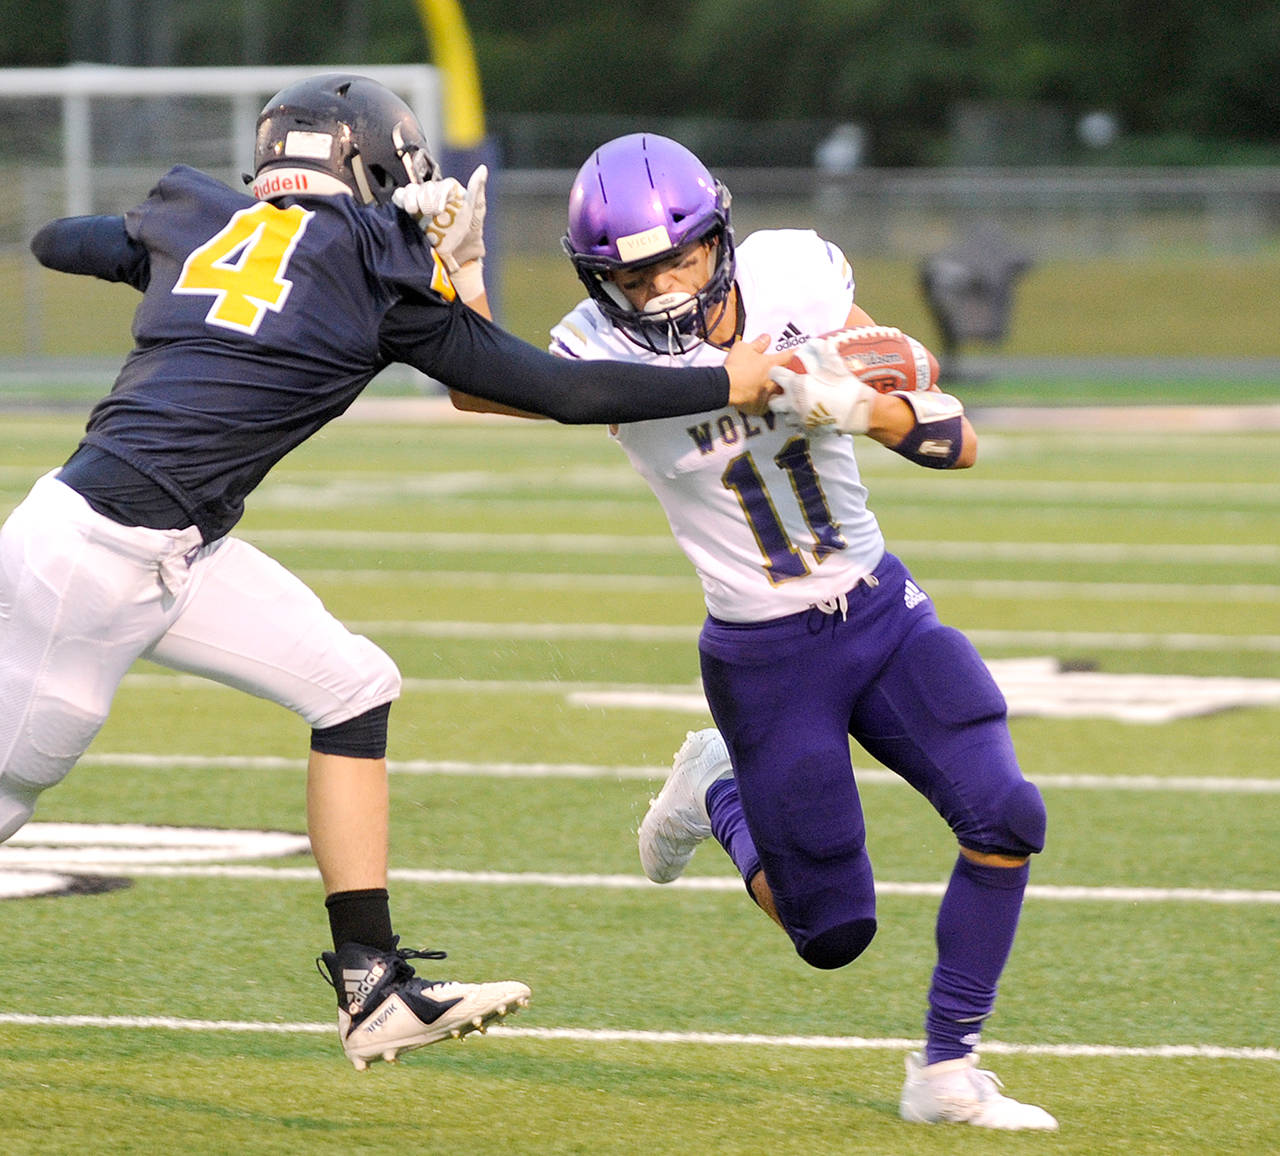 Sequim’s Michael Young, right, fends off the tackle attempt of Forks’ Carter Windle during a game earlier this season. (Michael Dashiell/Olympic Peninsula News Group)